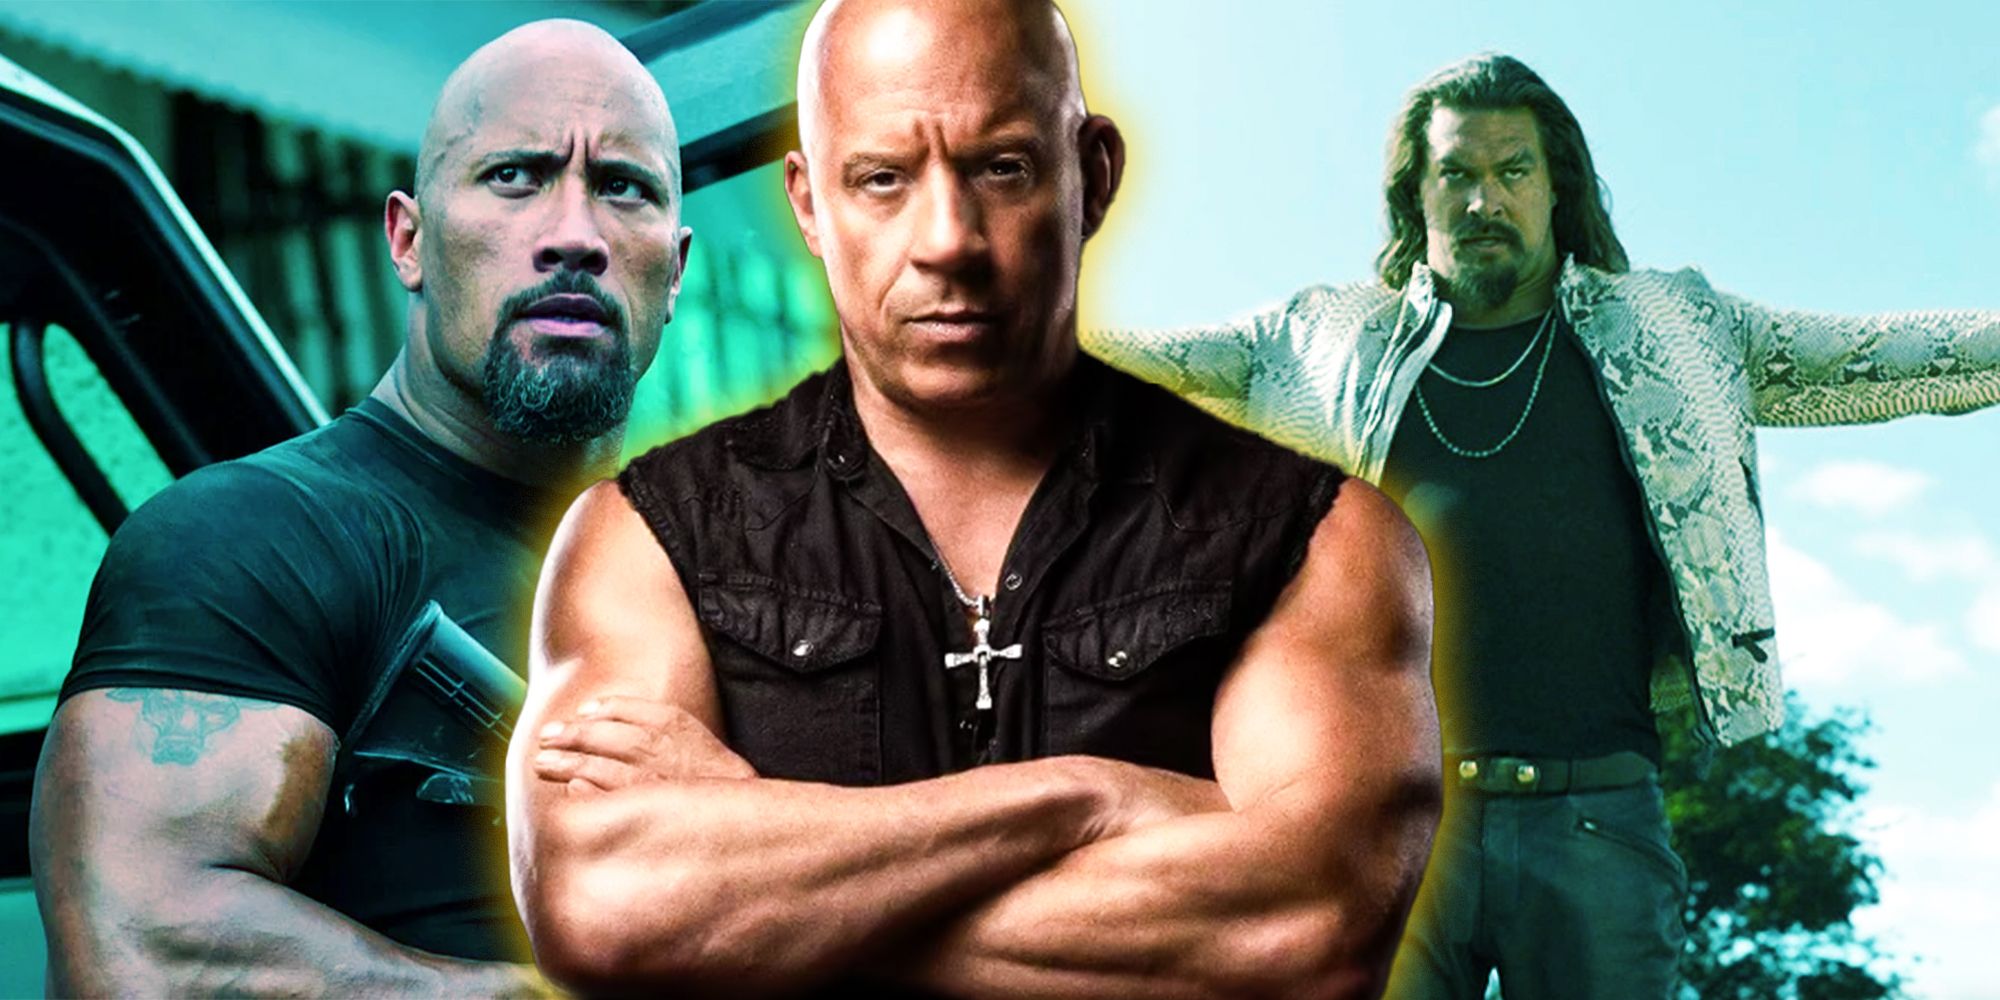 Hobbs, Dom, and Dante in the Fast & Furious movies